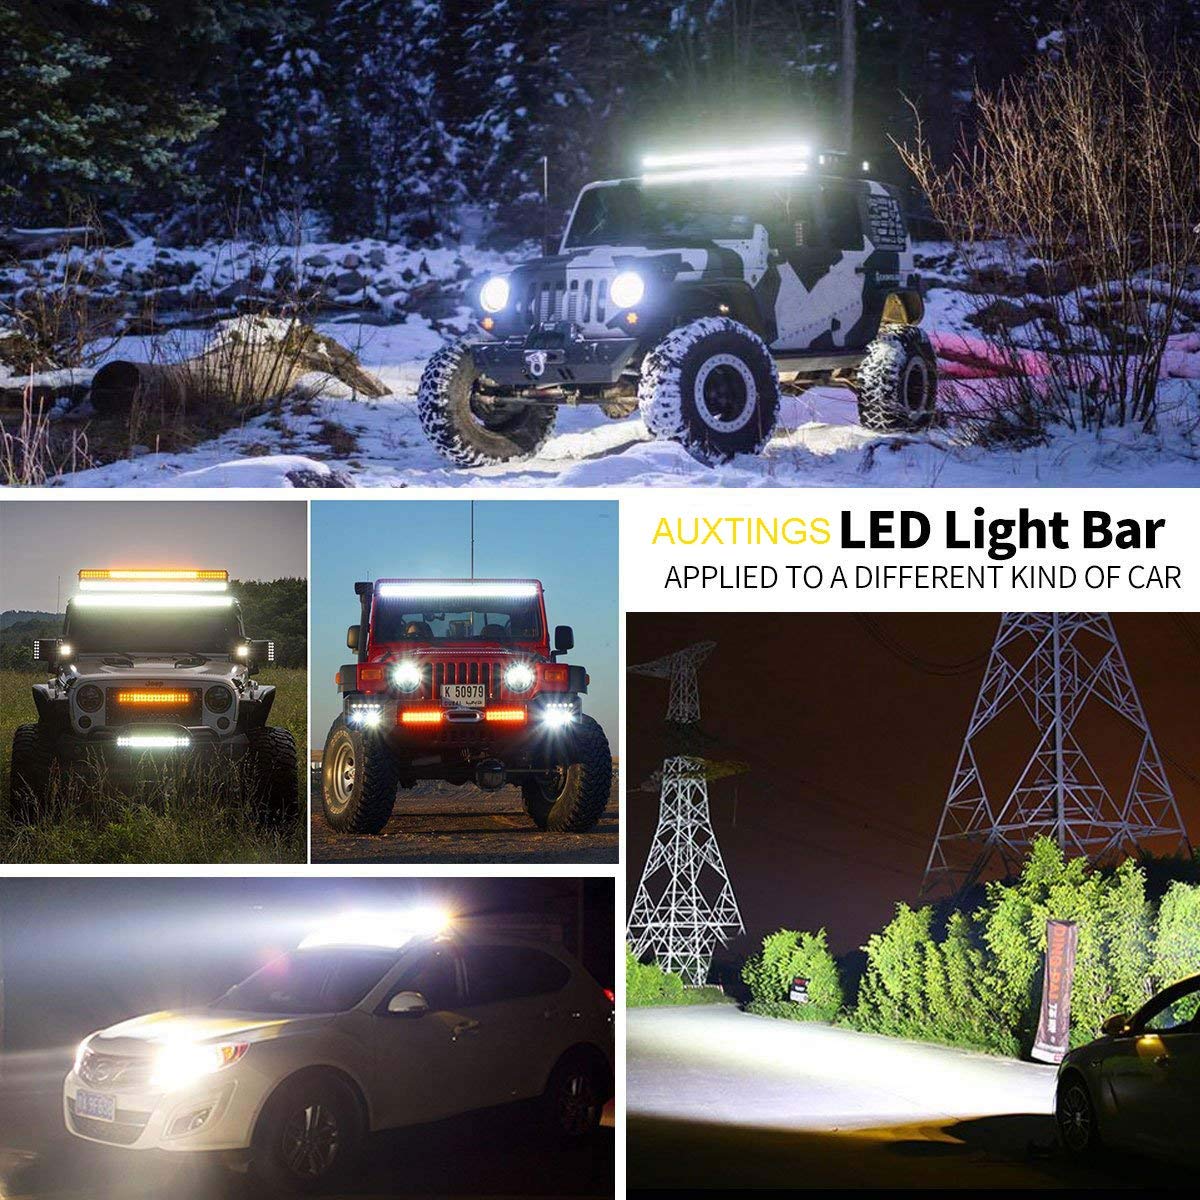 AUXTINGS 22 inch 120W Spot Flood Beam Led Light Bar 2X 4 inch 18W Spot LED Pods Fog Lights with 12V Wiring Harness Kit 2 Leads for Jeep Pickup Off Road Truck 4X4 ATV Boat Trailer,Waterproof